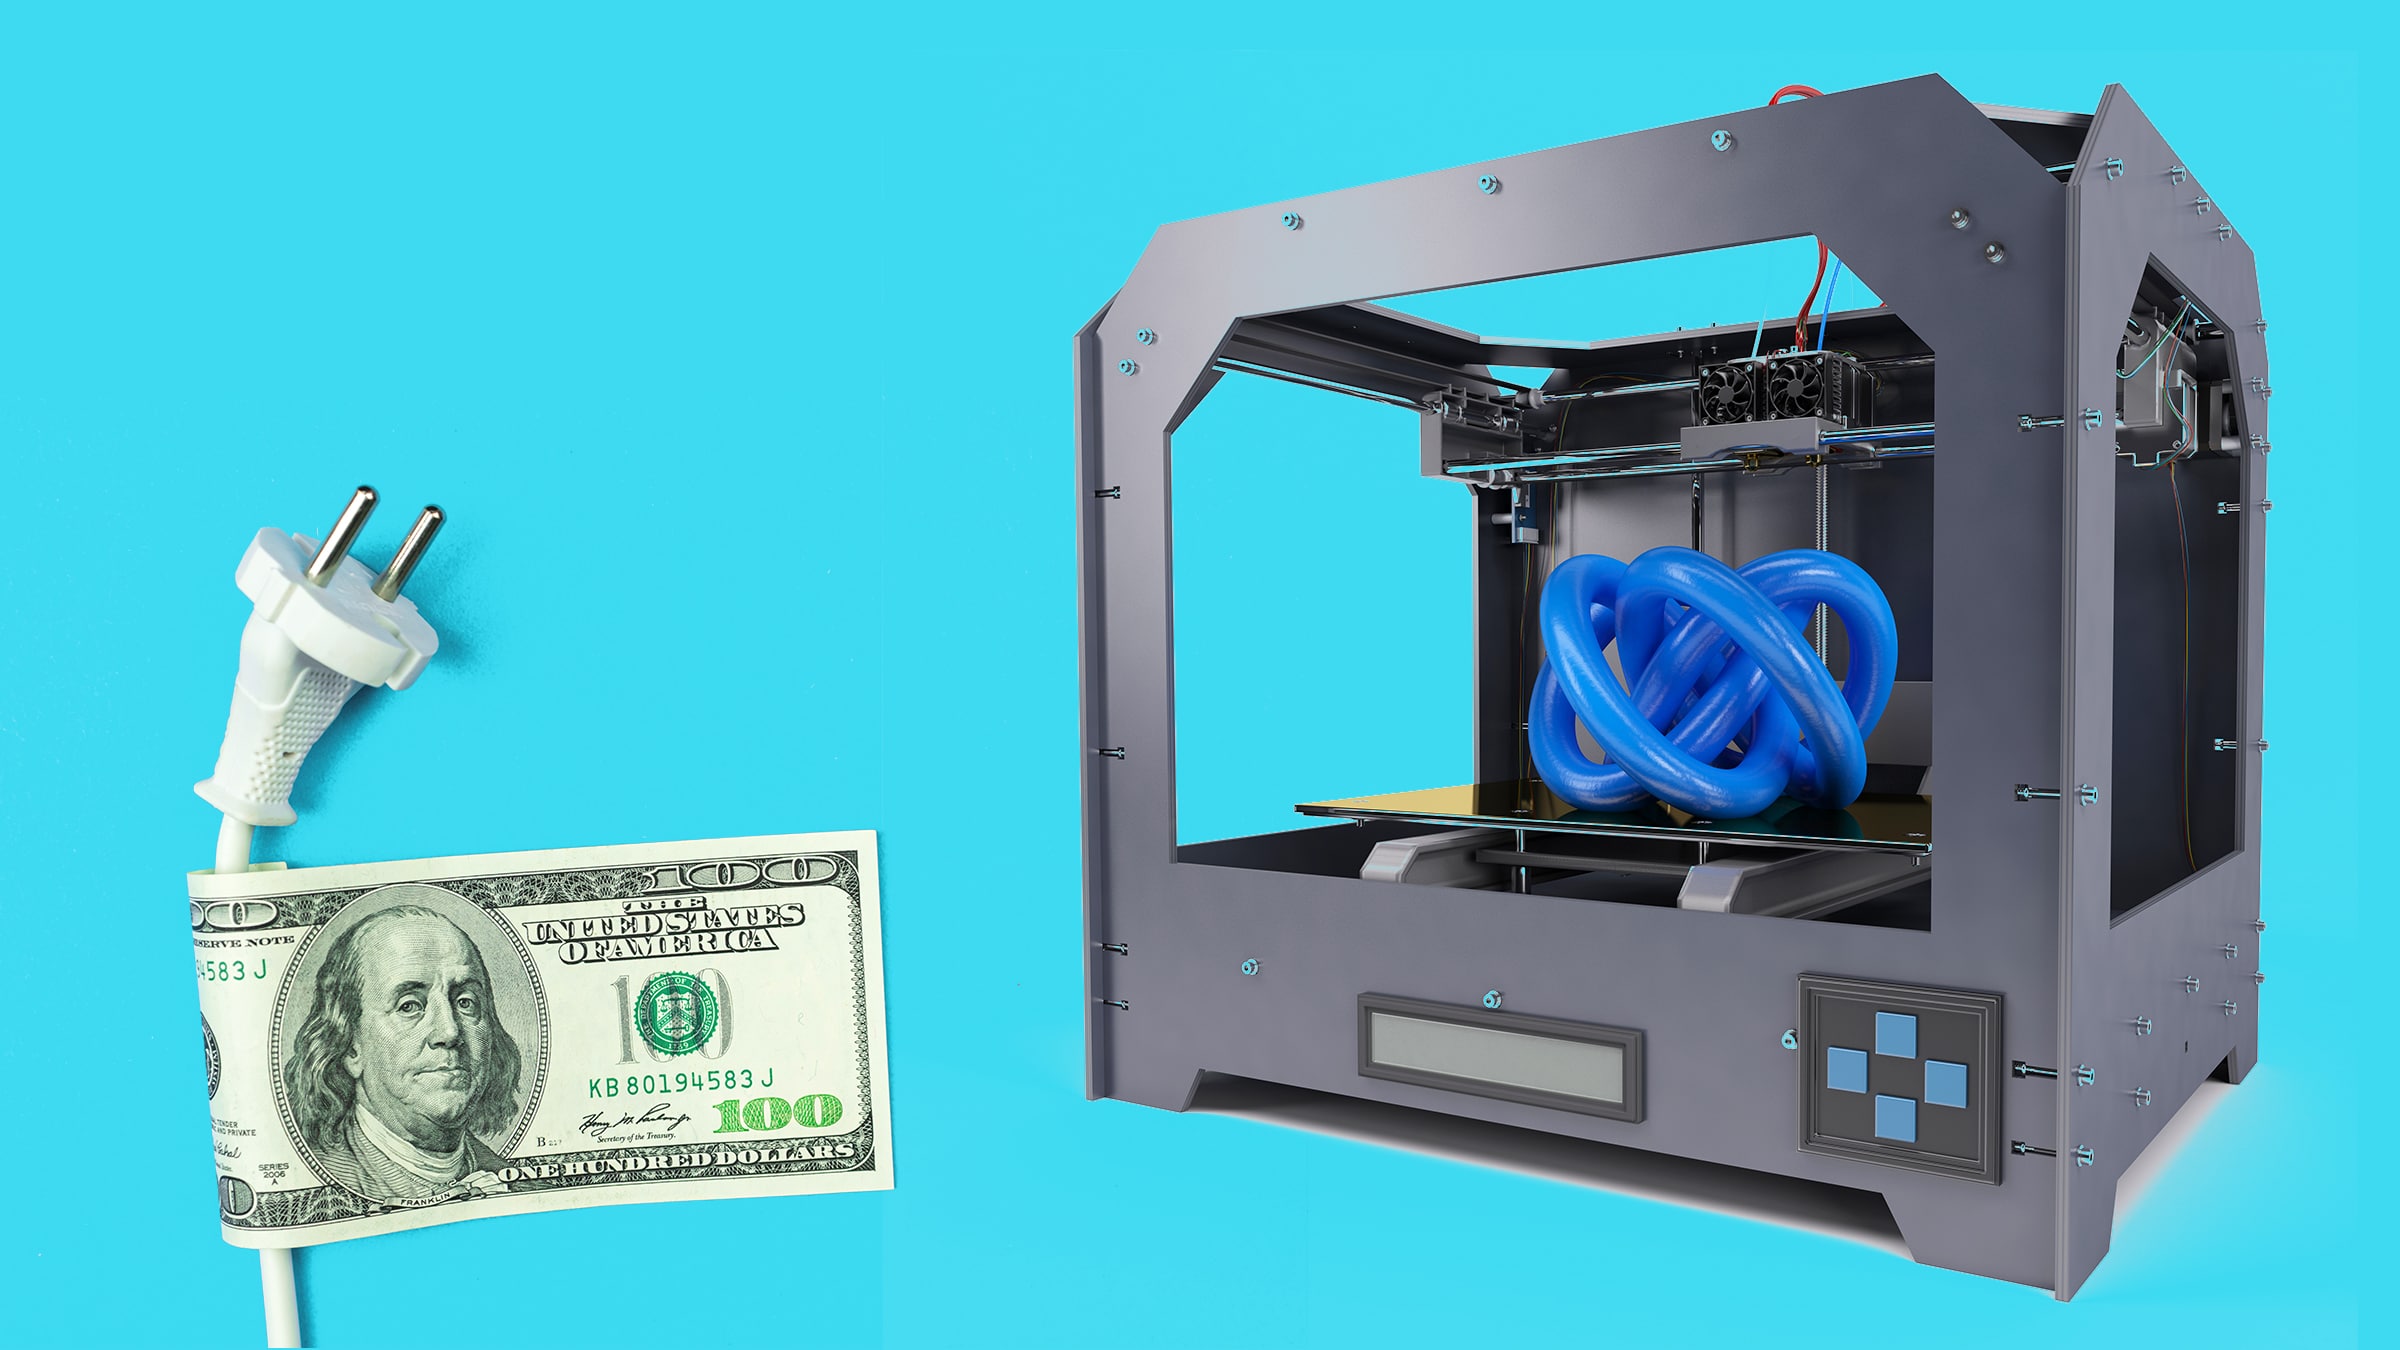 How Much Power Does A 3D Printer Use For An Hour?